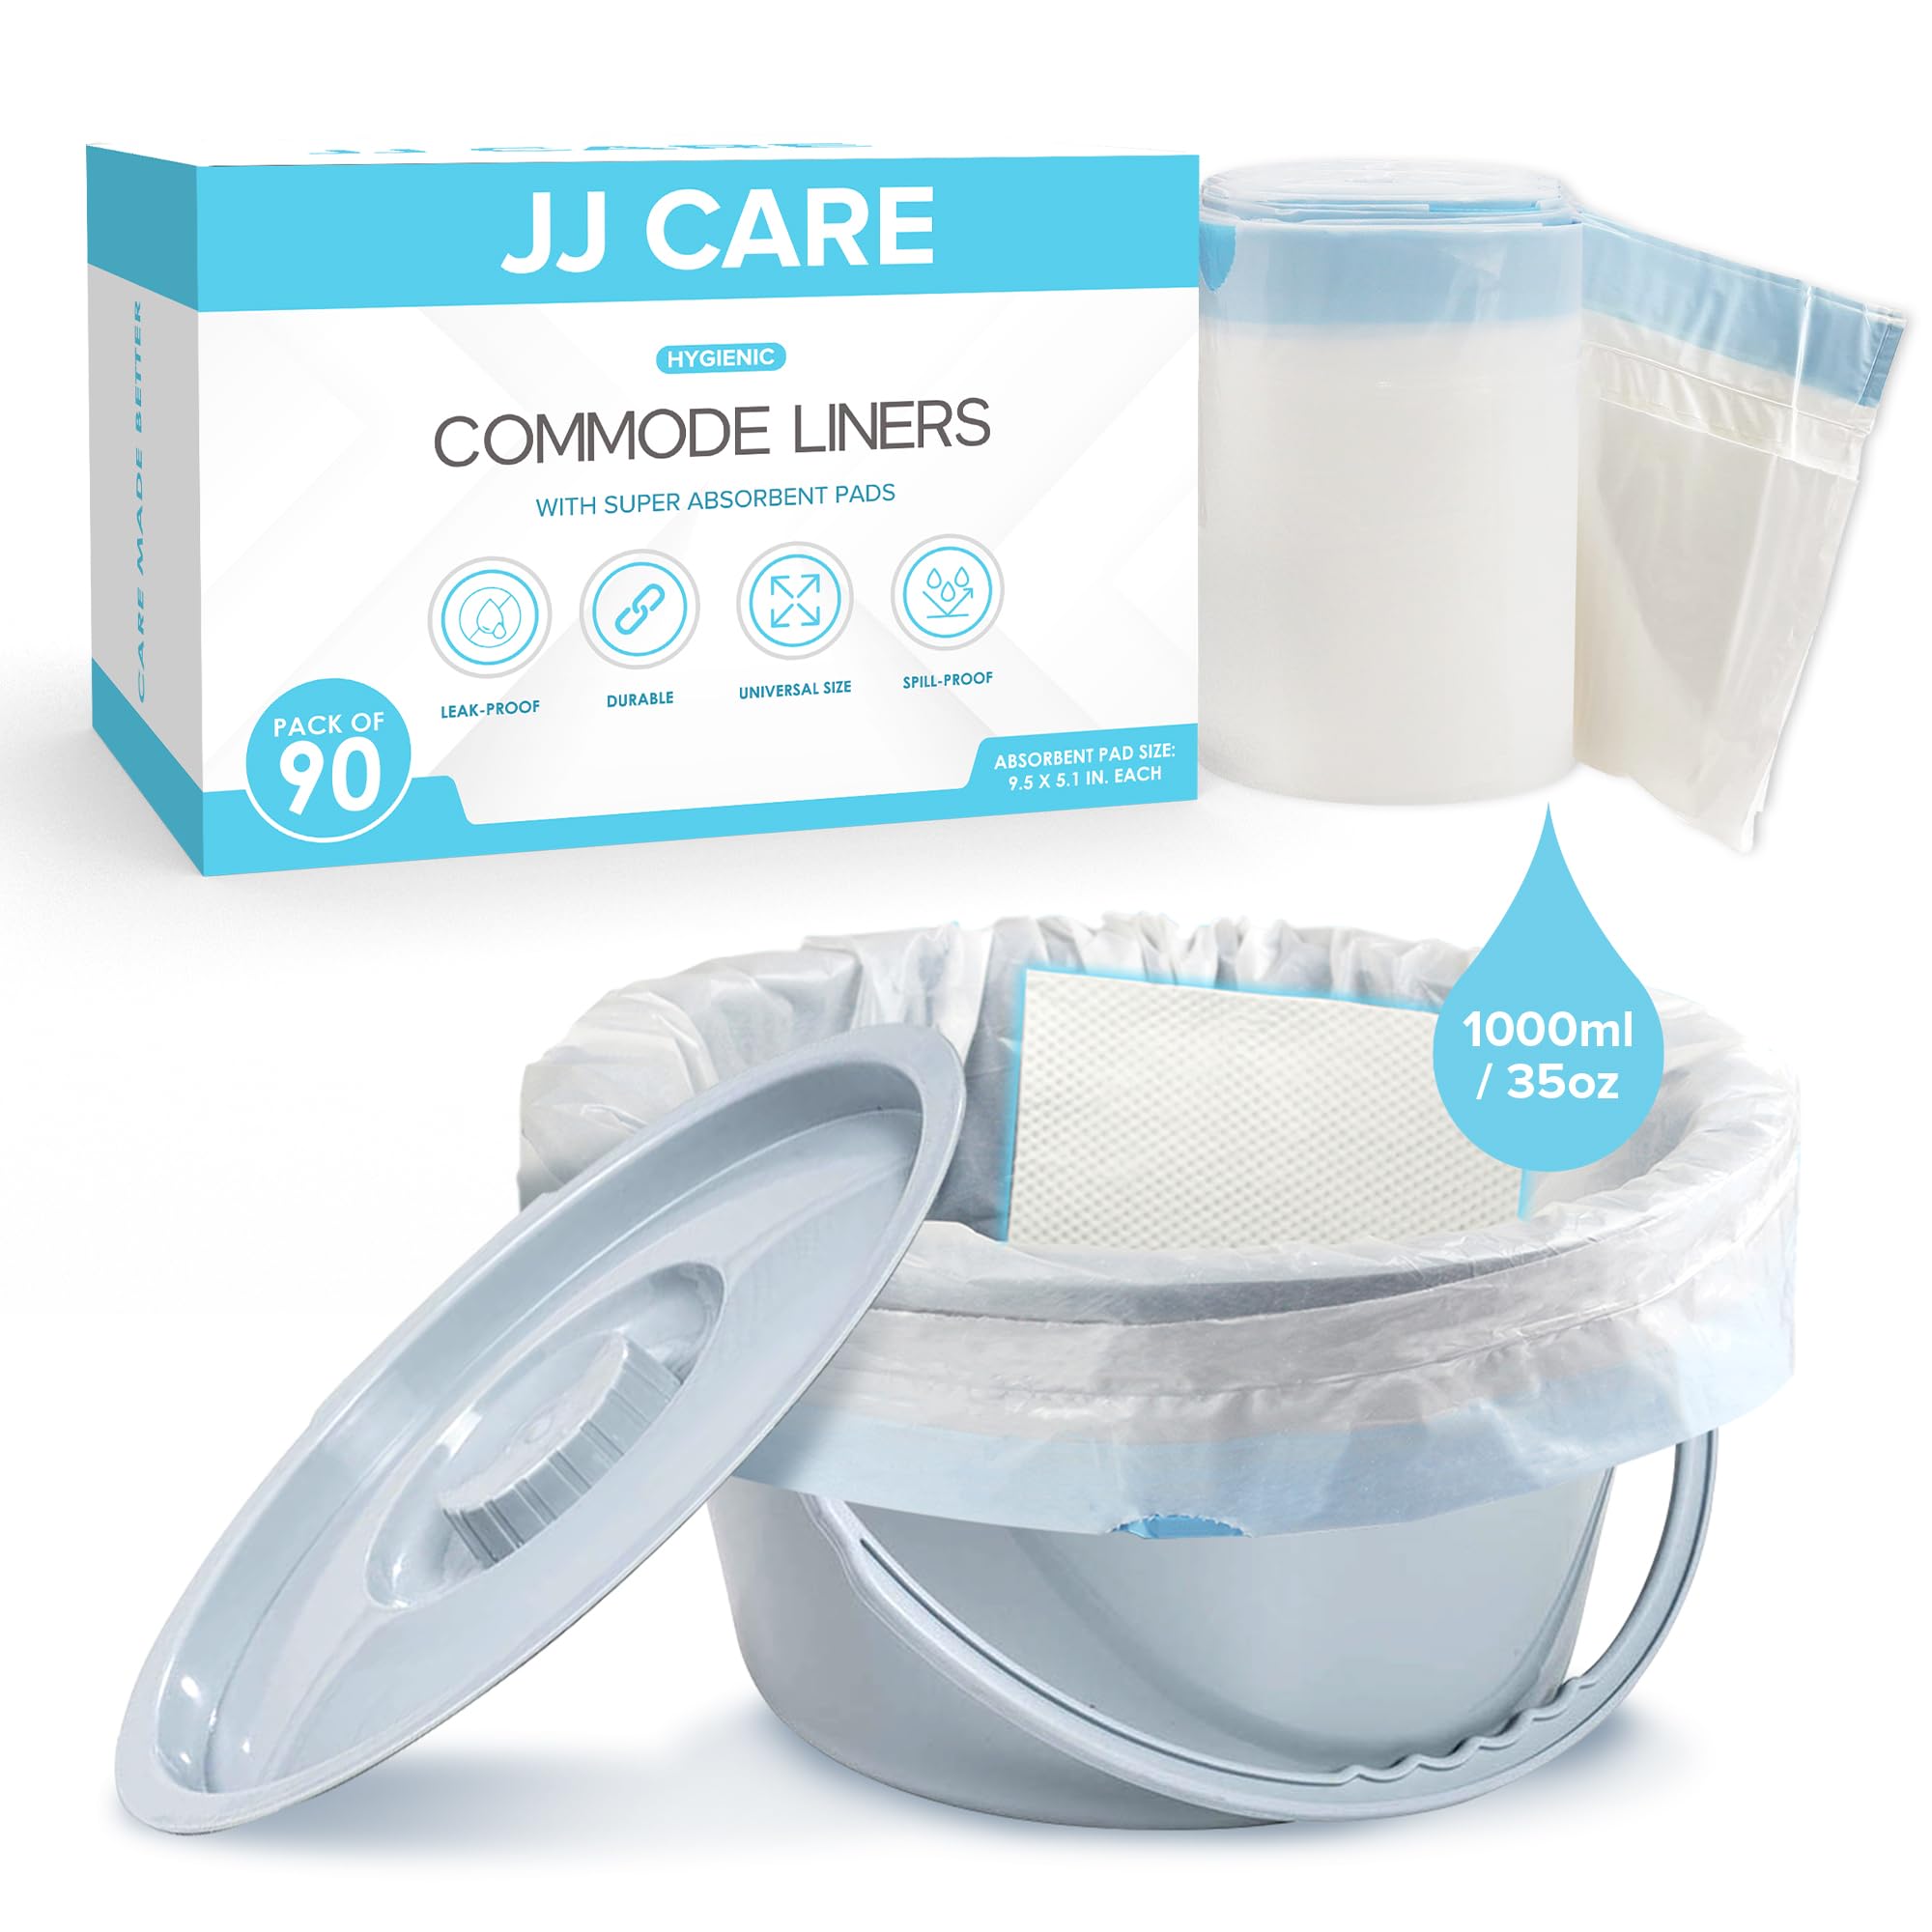 JJ CARE Commode Liners for Bedside Toilet Chair Bucket - Pack of 90 Disposable Bedside Commode Liners with Absorbent Pads - Adult Potty Chair Liners & Portable Toilet Liner